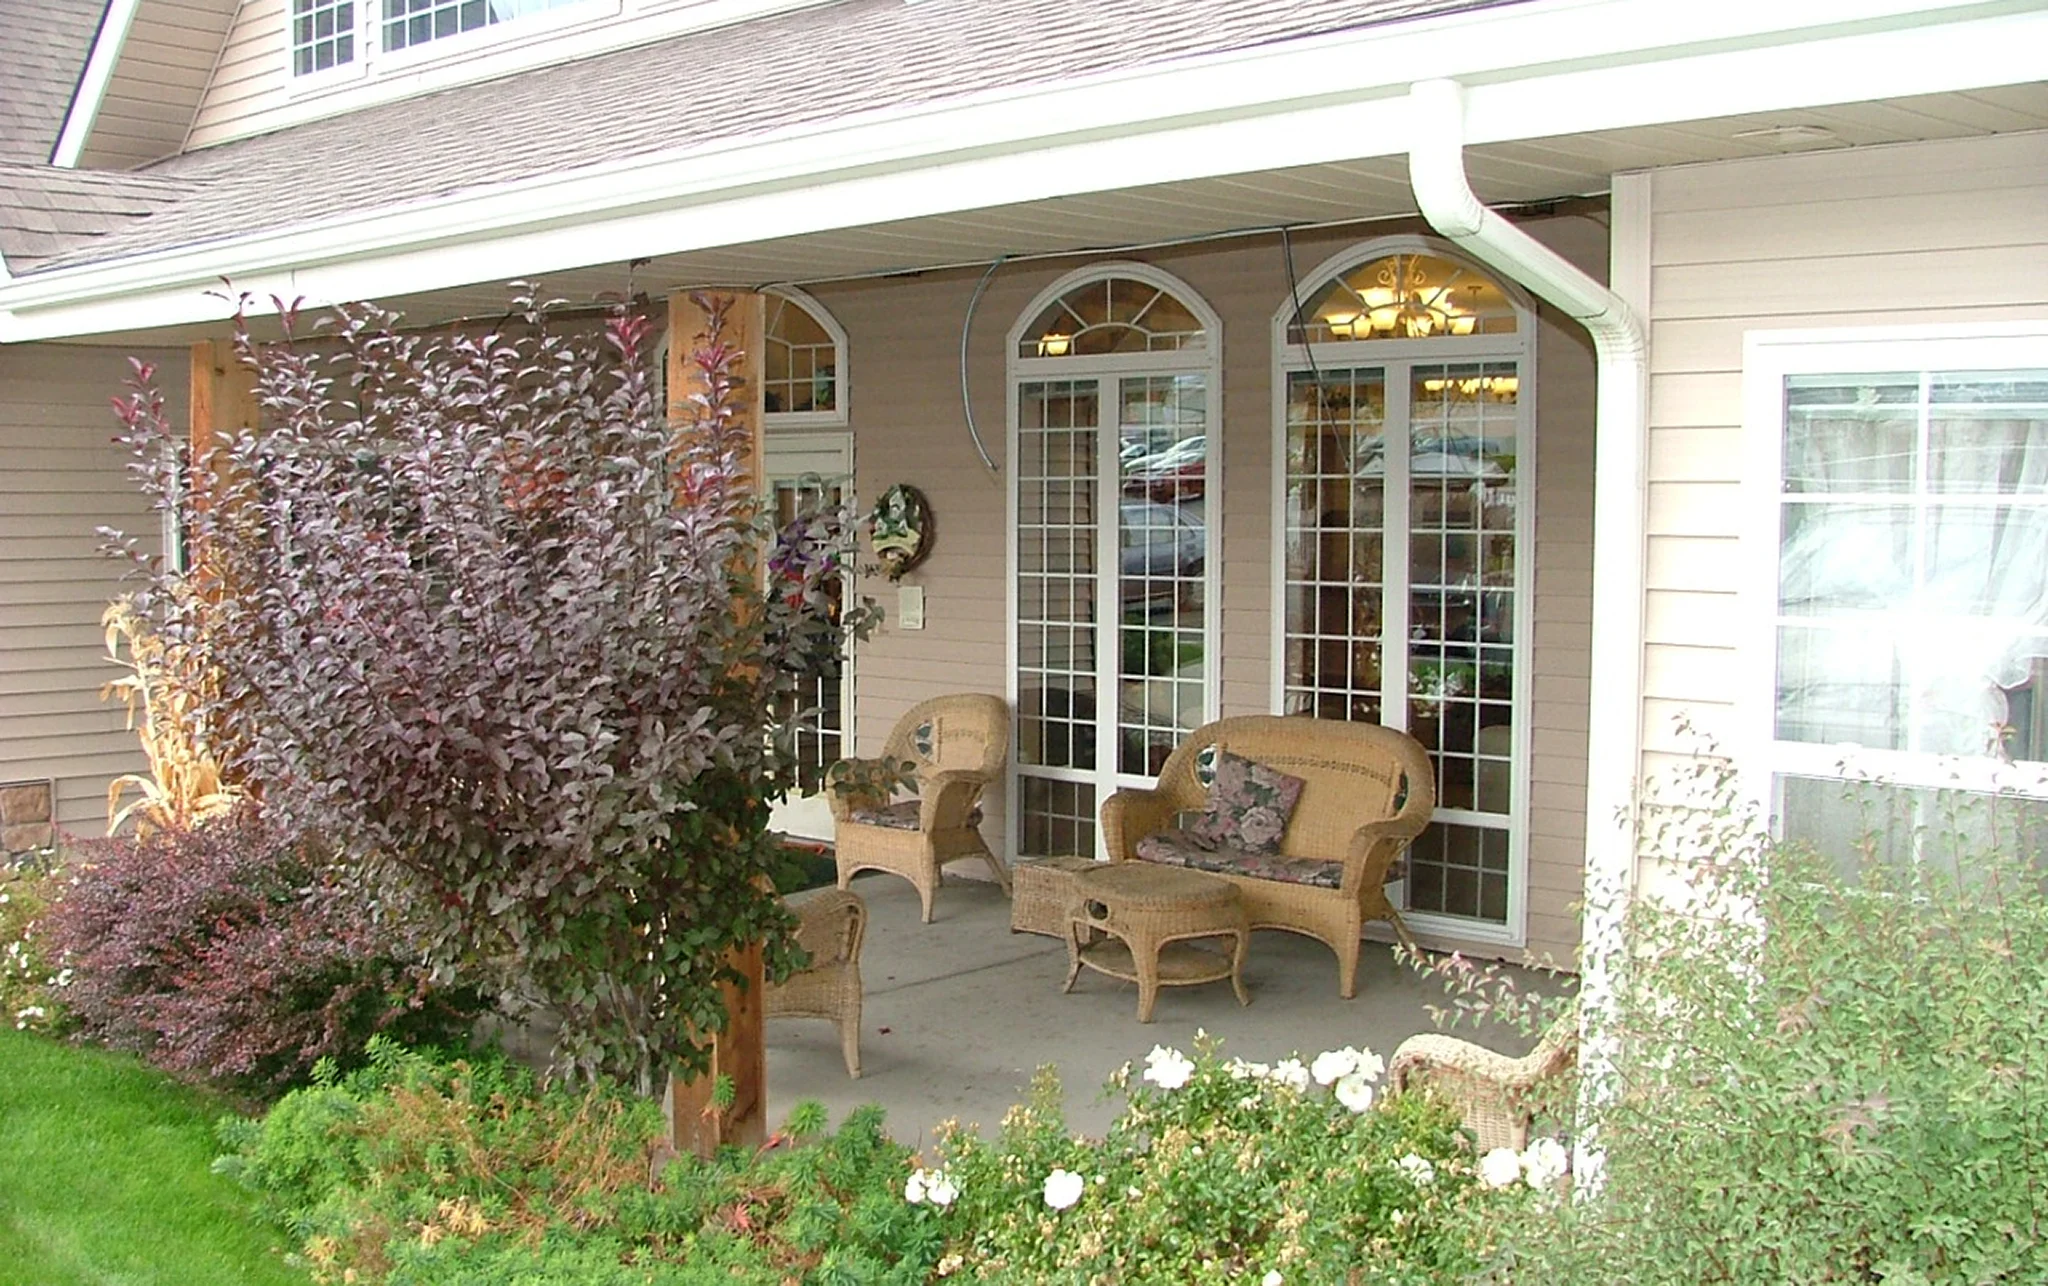 Well-furnished porch facing a yard full of varied shrubbery